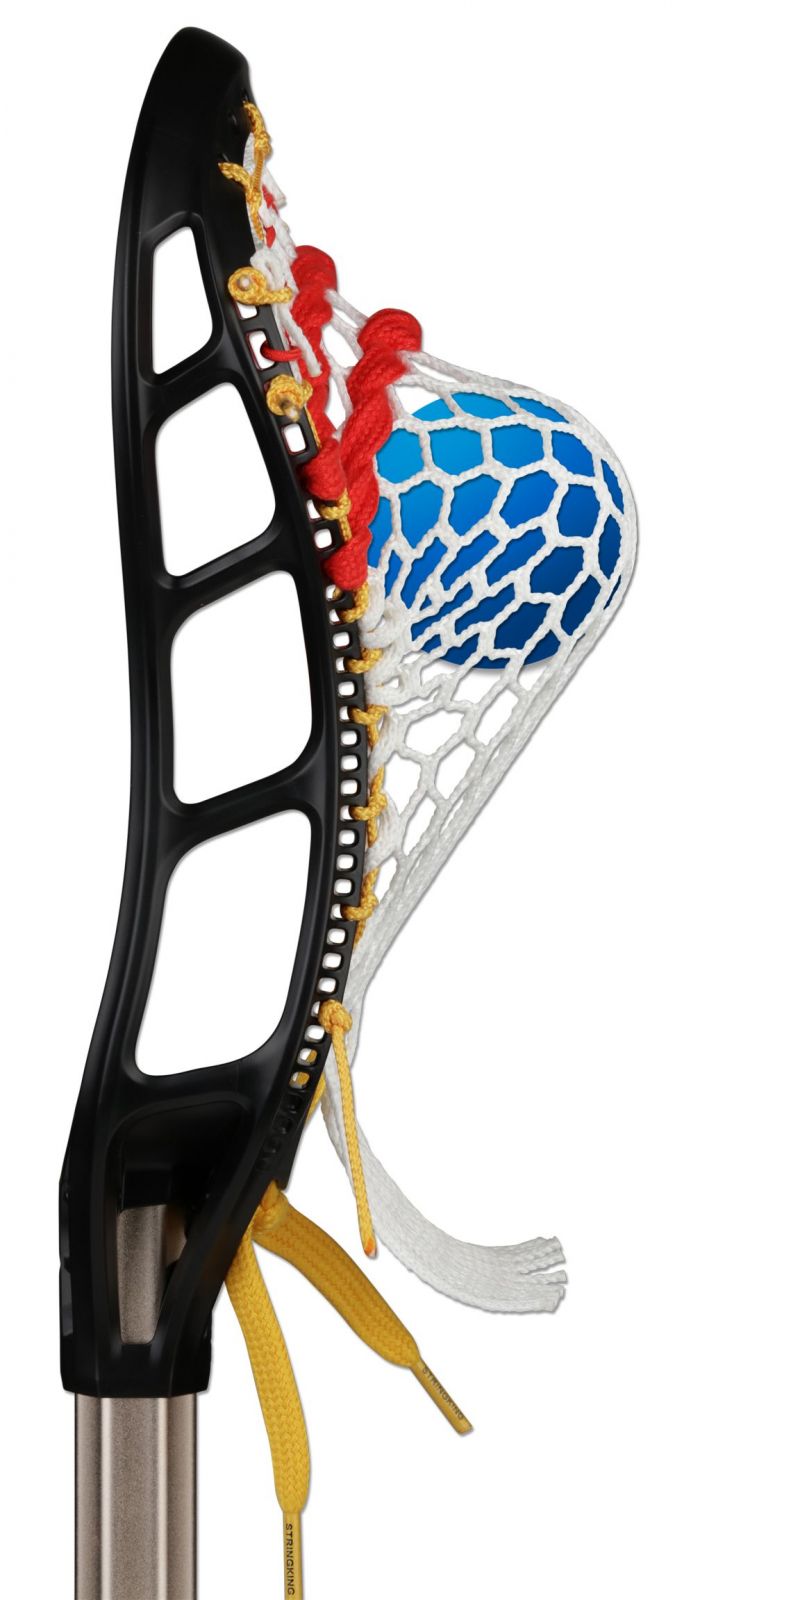 Check Out This Highly Rated Stringking Mark 2D Lacrosse Head